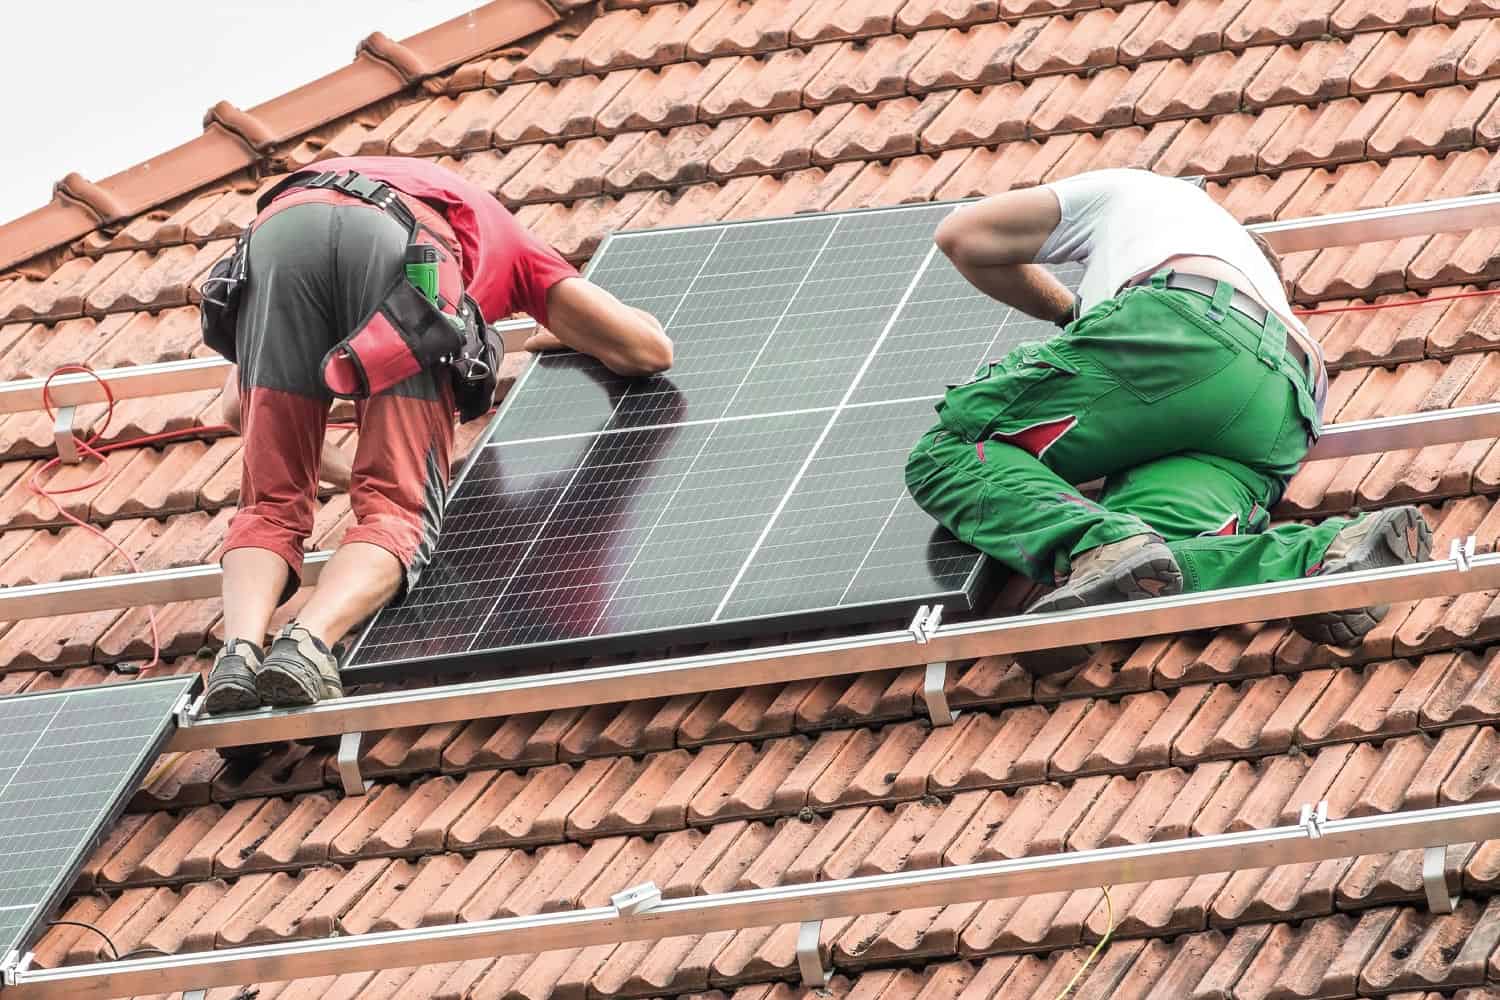 Two workmen on a roof installing a solar panel